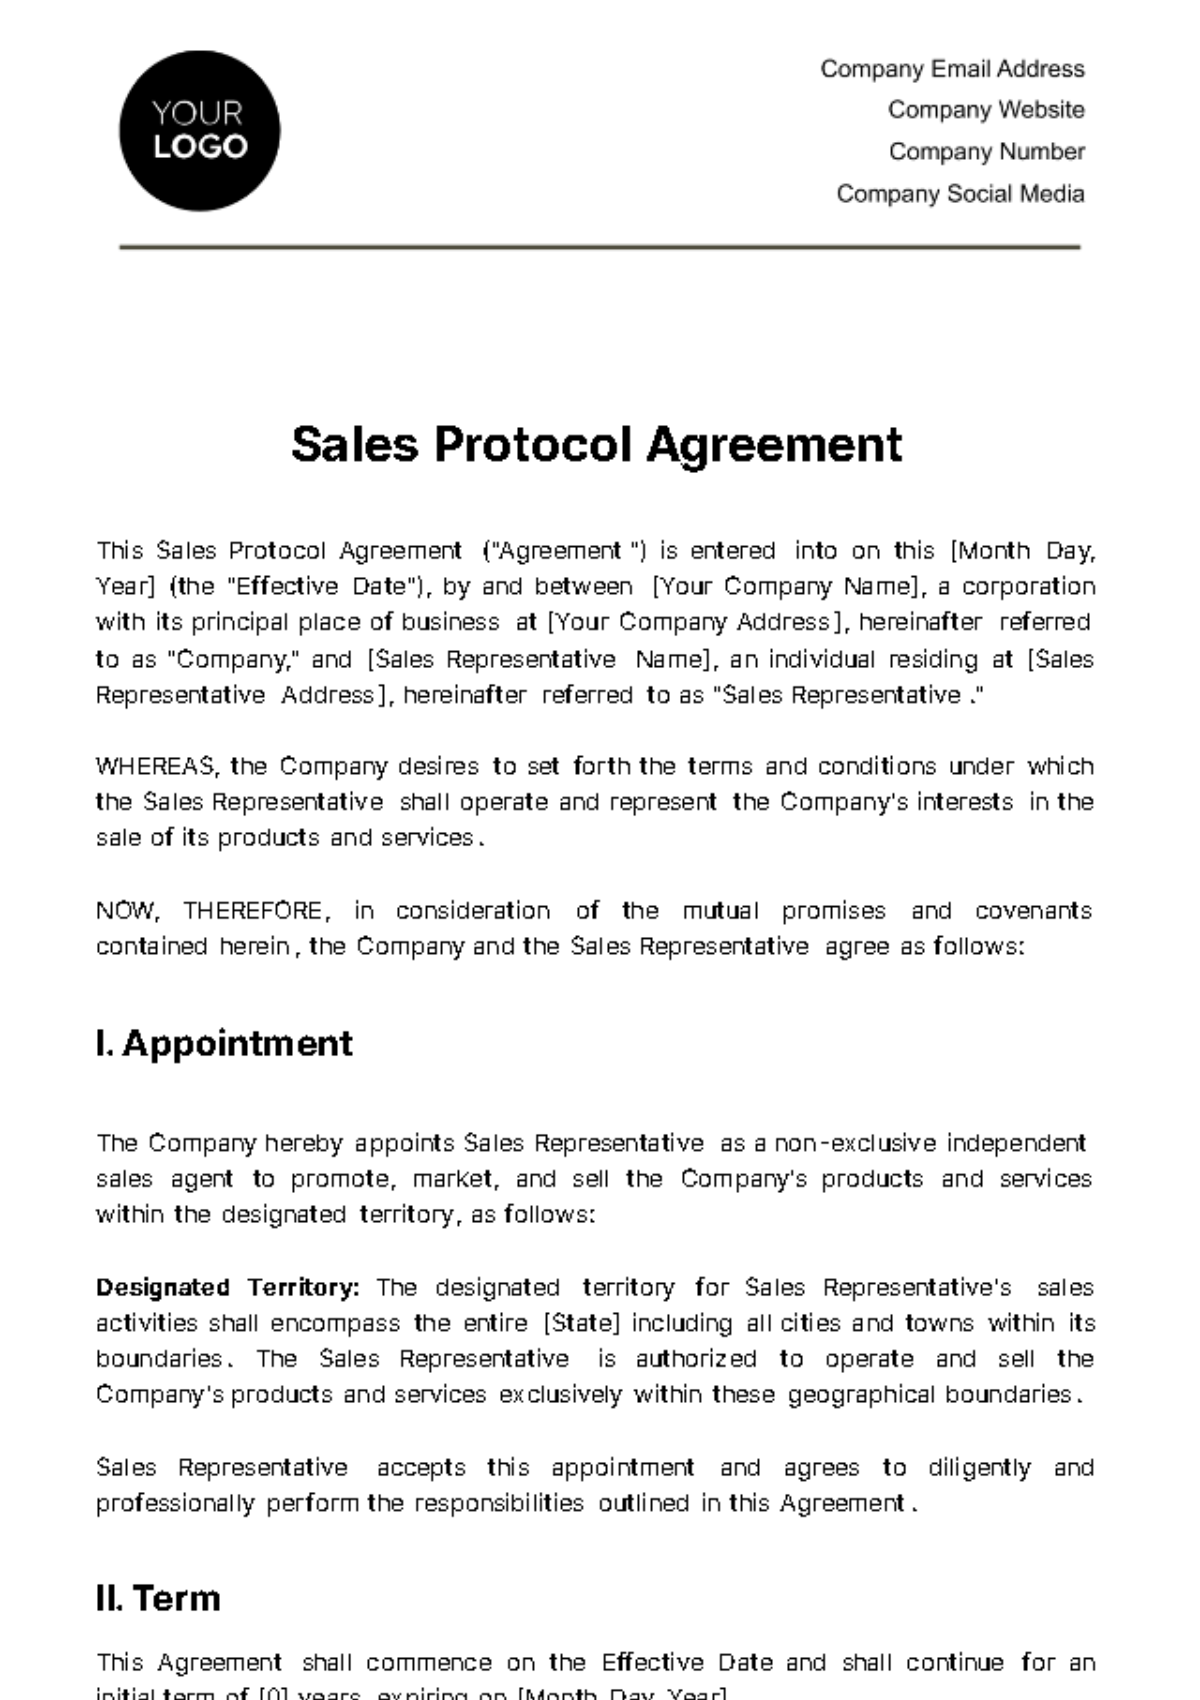 Free Sales Protocol Agreement Template